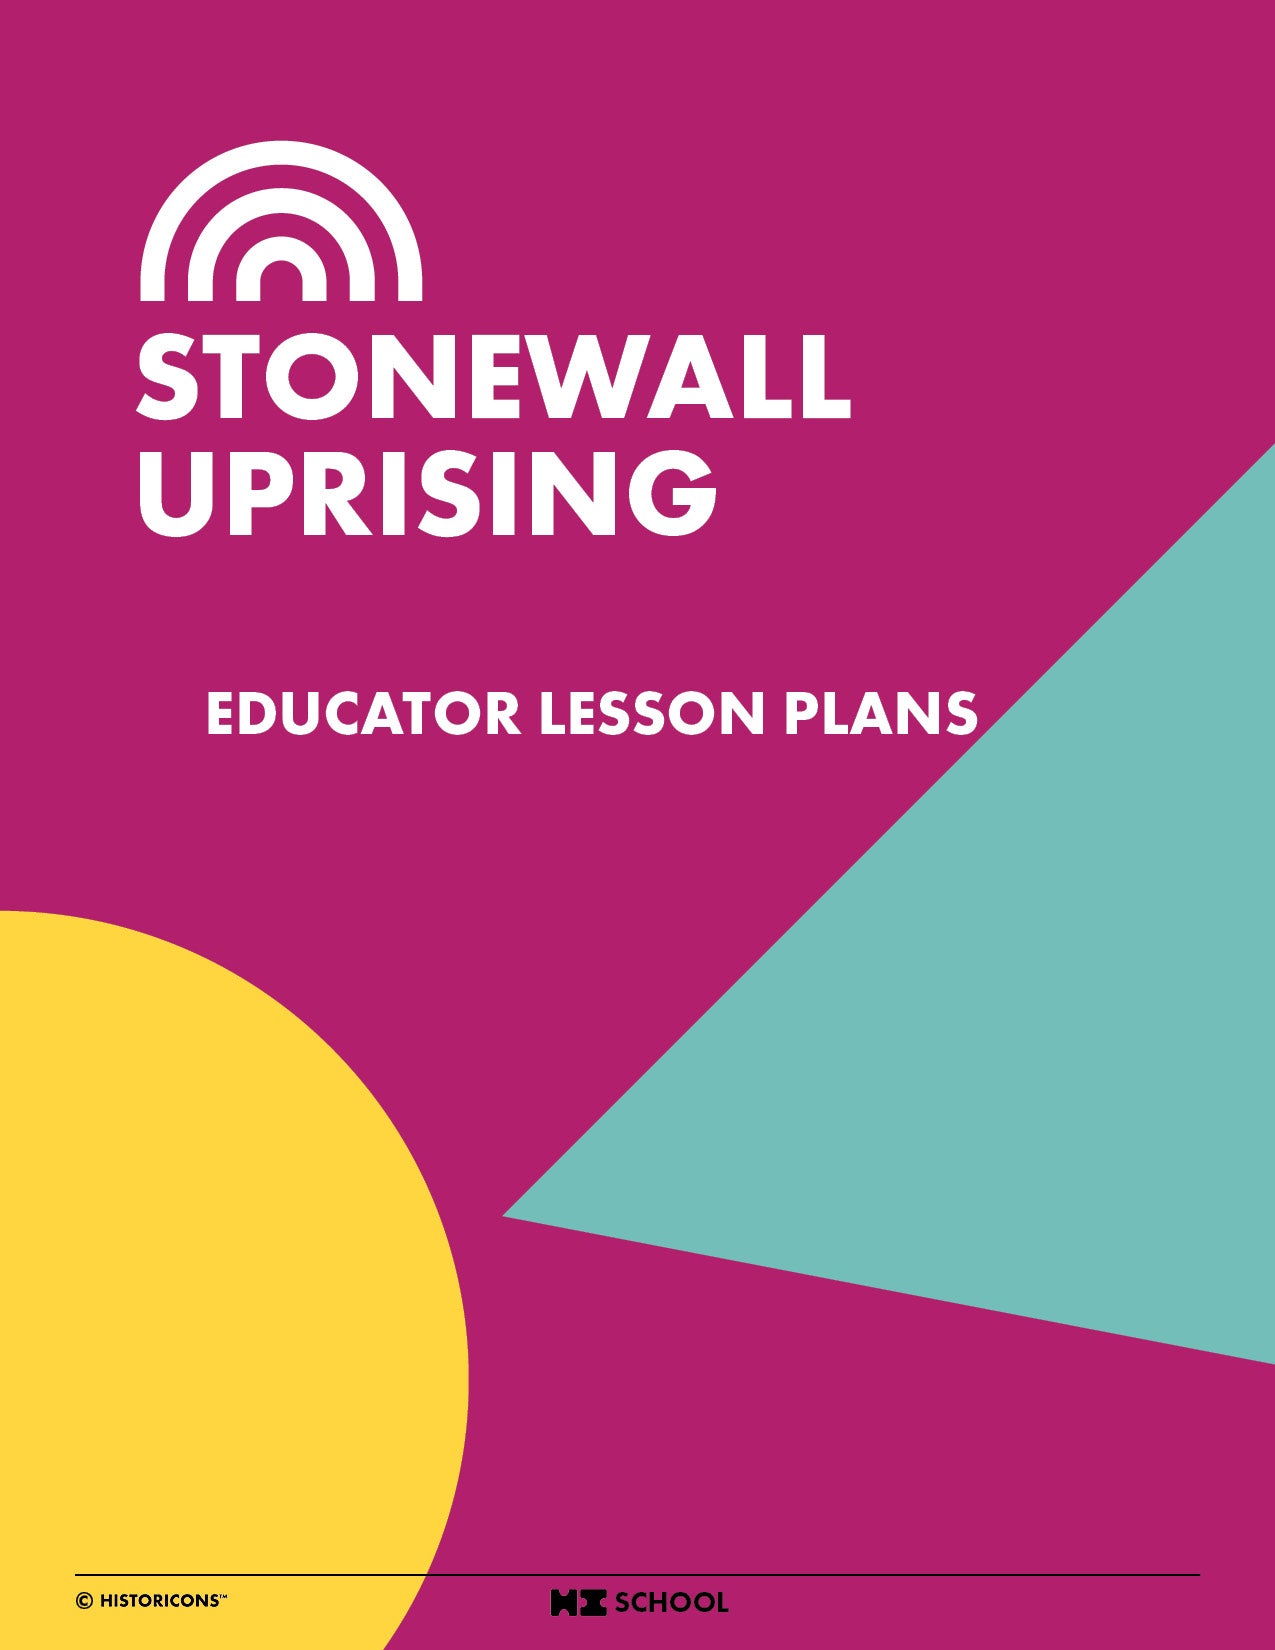 A colorful magenta, teal, and yellow cover photo of the HI School Stonewall Uprising educator lesson plans is displayed. A classroom symbol signifies that this classroom resource is suitable for use with elementary and middle school students.